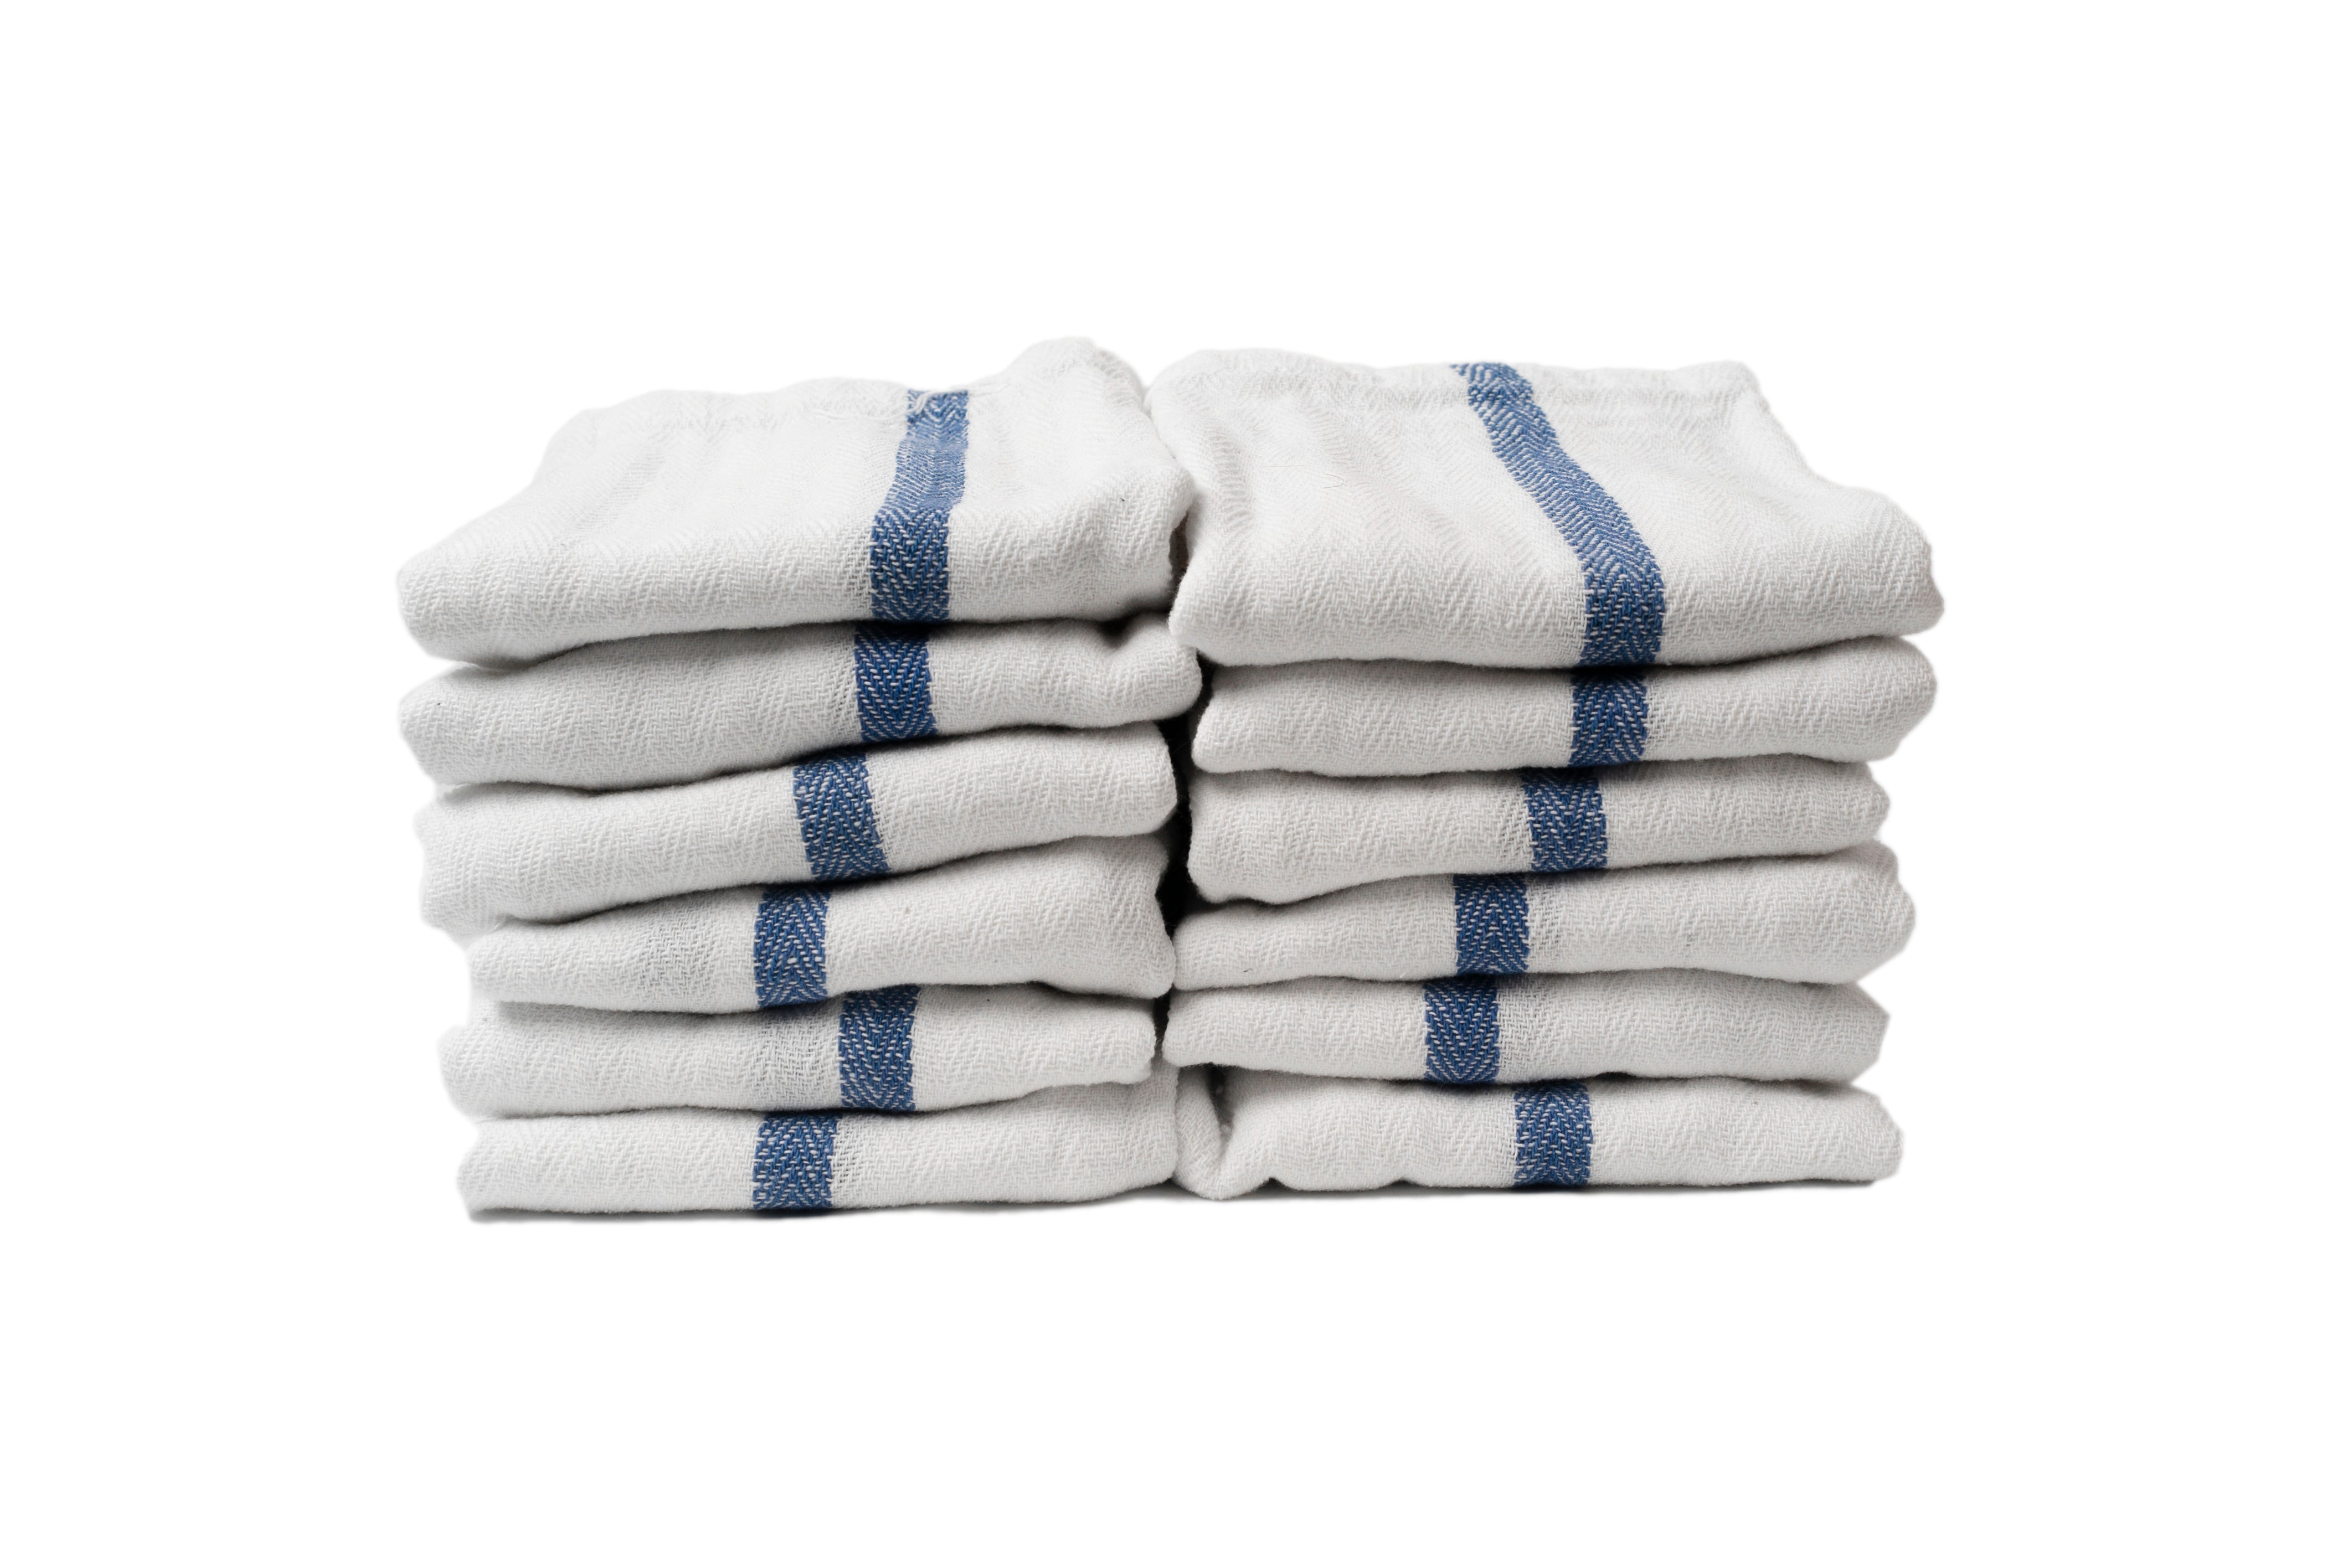 Wholesale Bar Mop Towels by Intralin